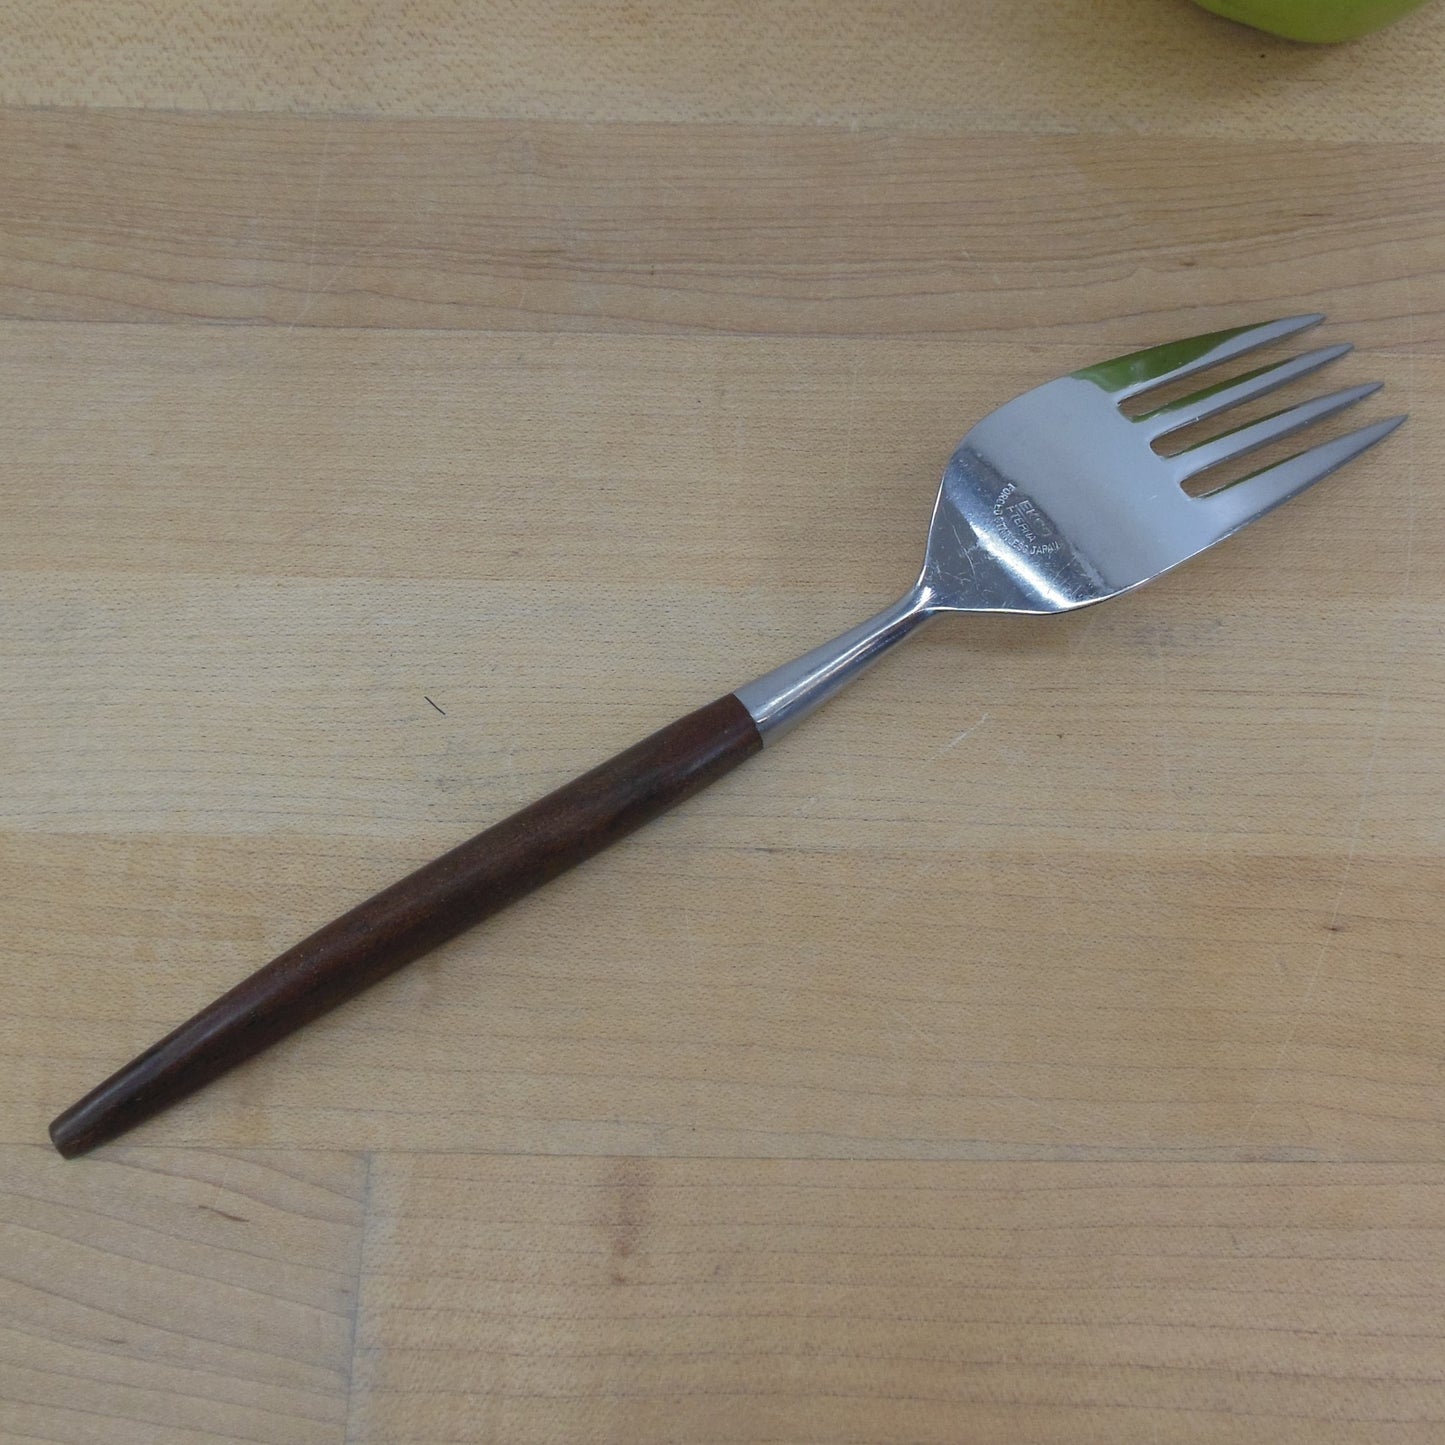 Ekco Eterna Stainless Canoe Muffin Brown - Cold Meat Serving Fork used